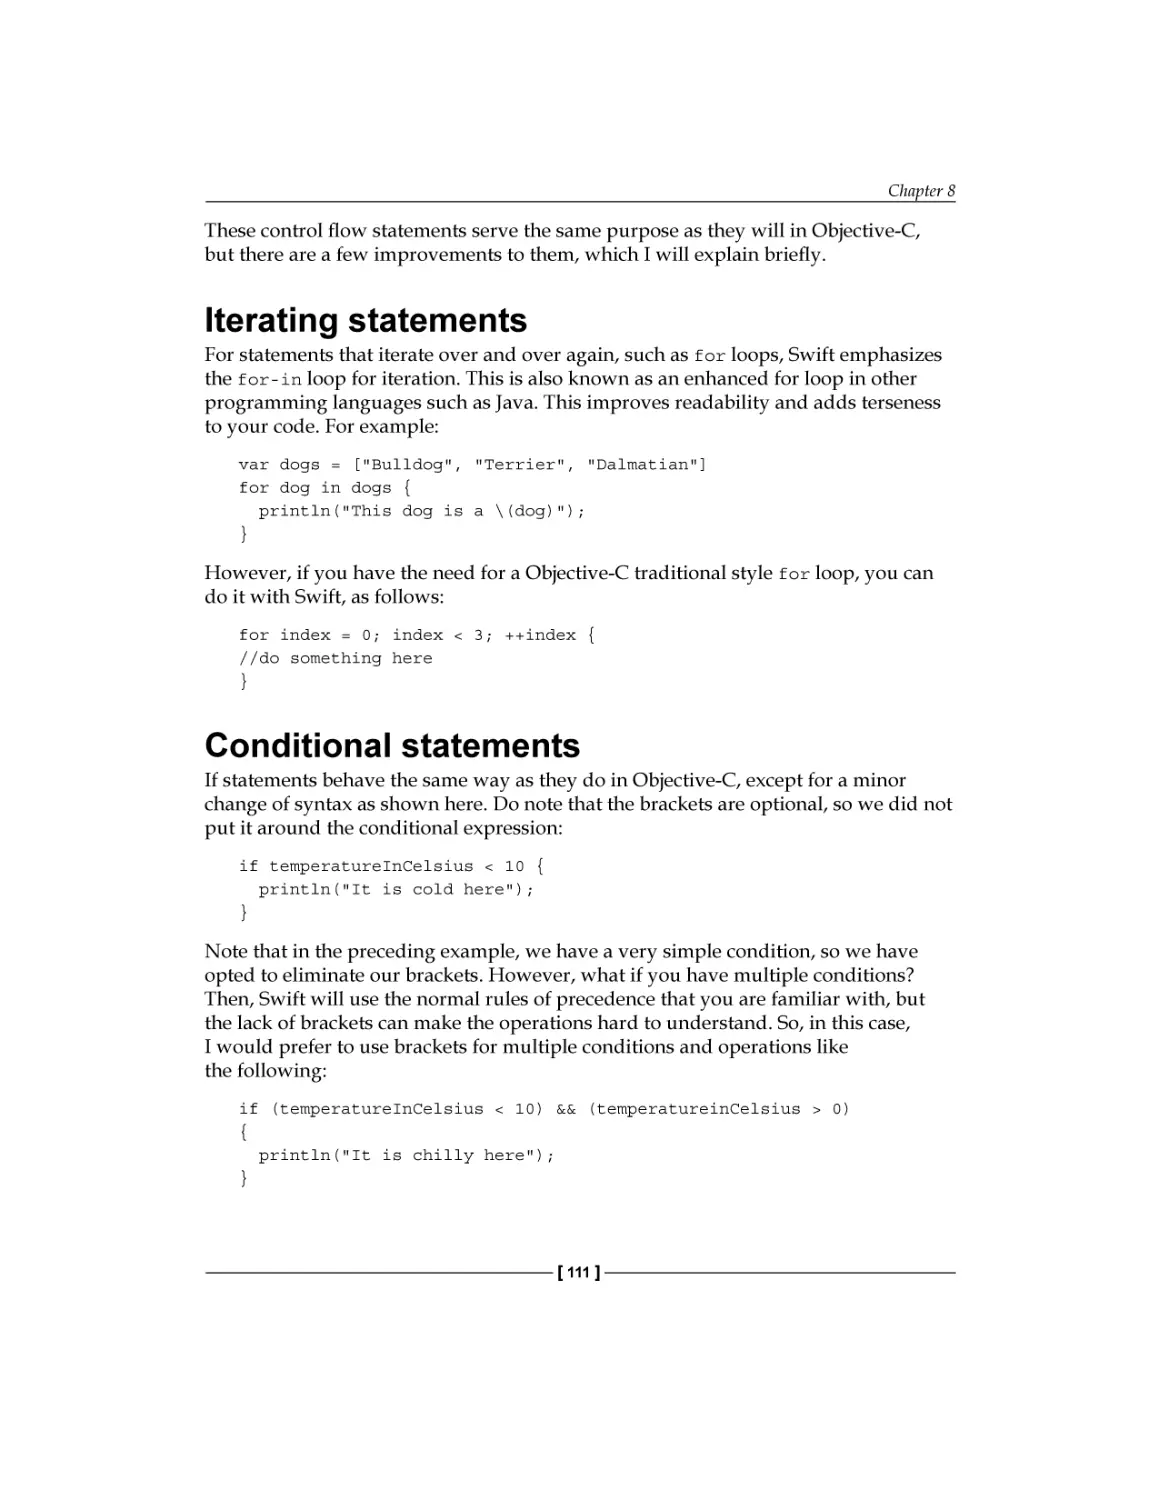 Iterating statements
Conditional statements